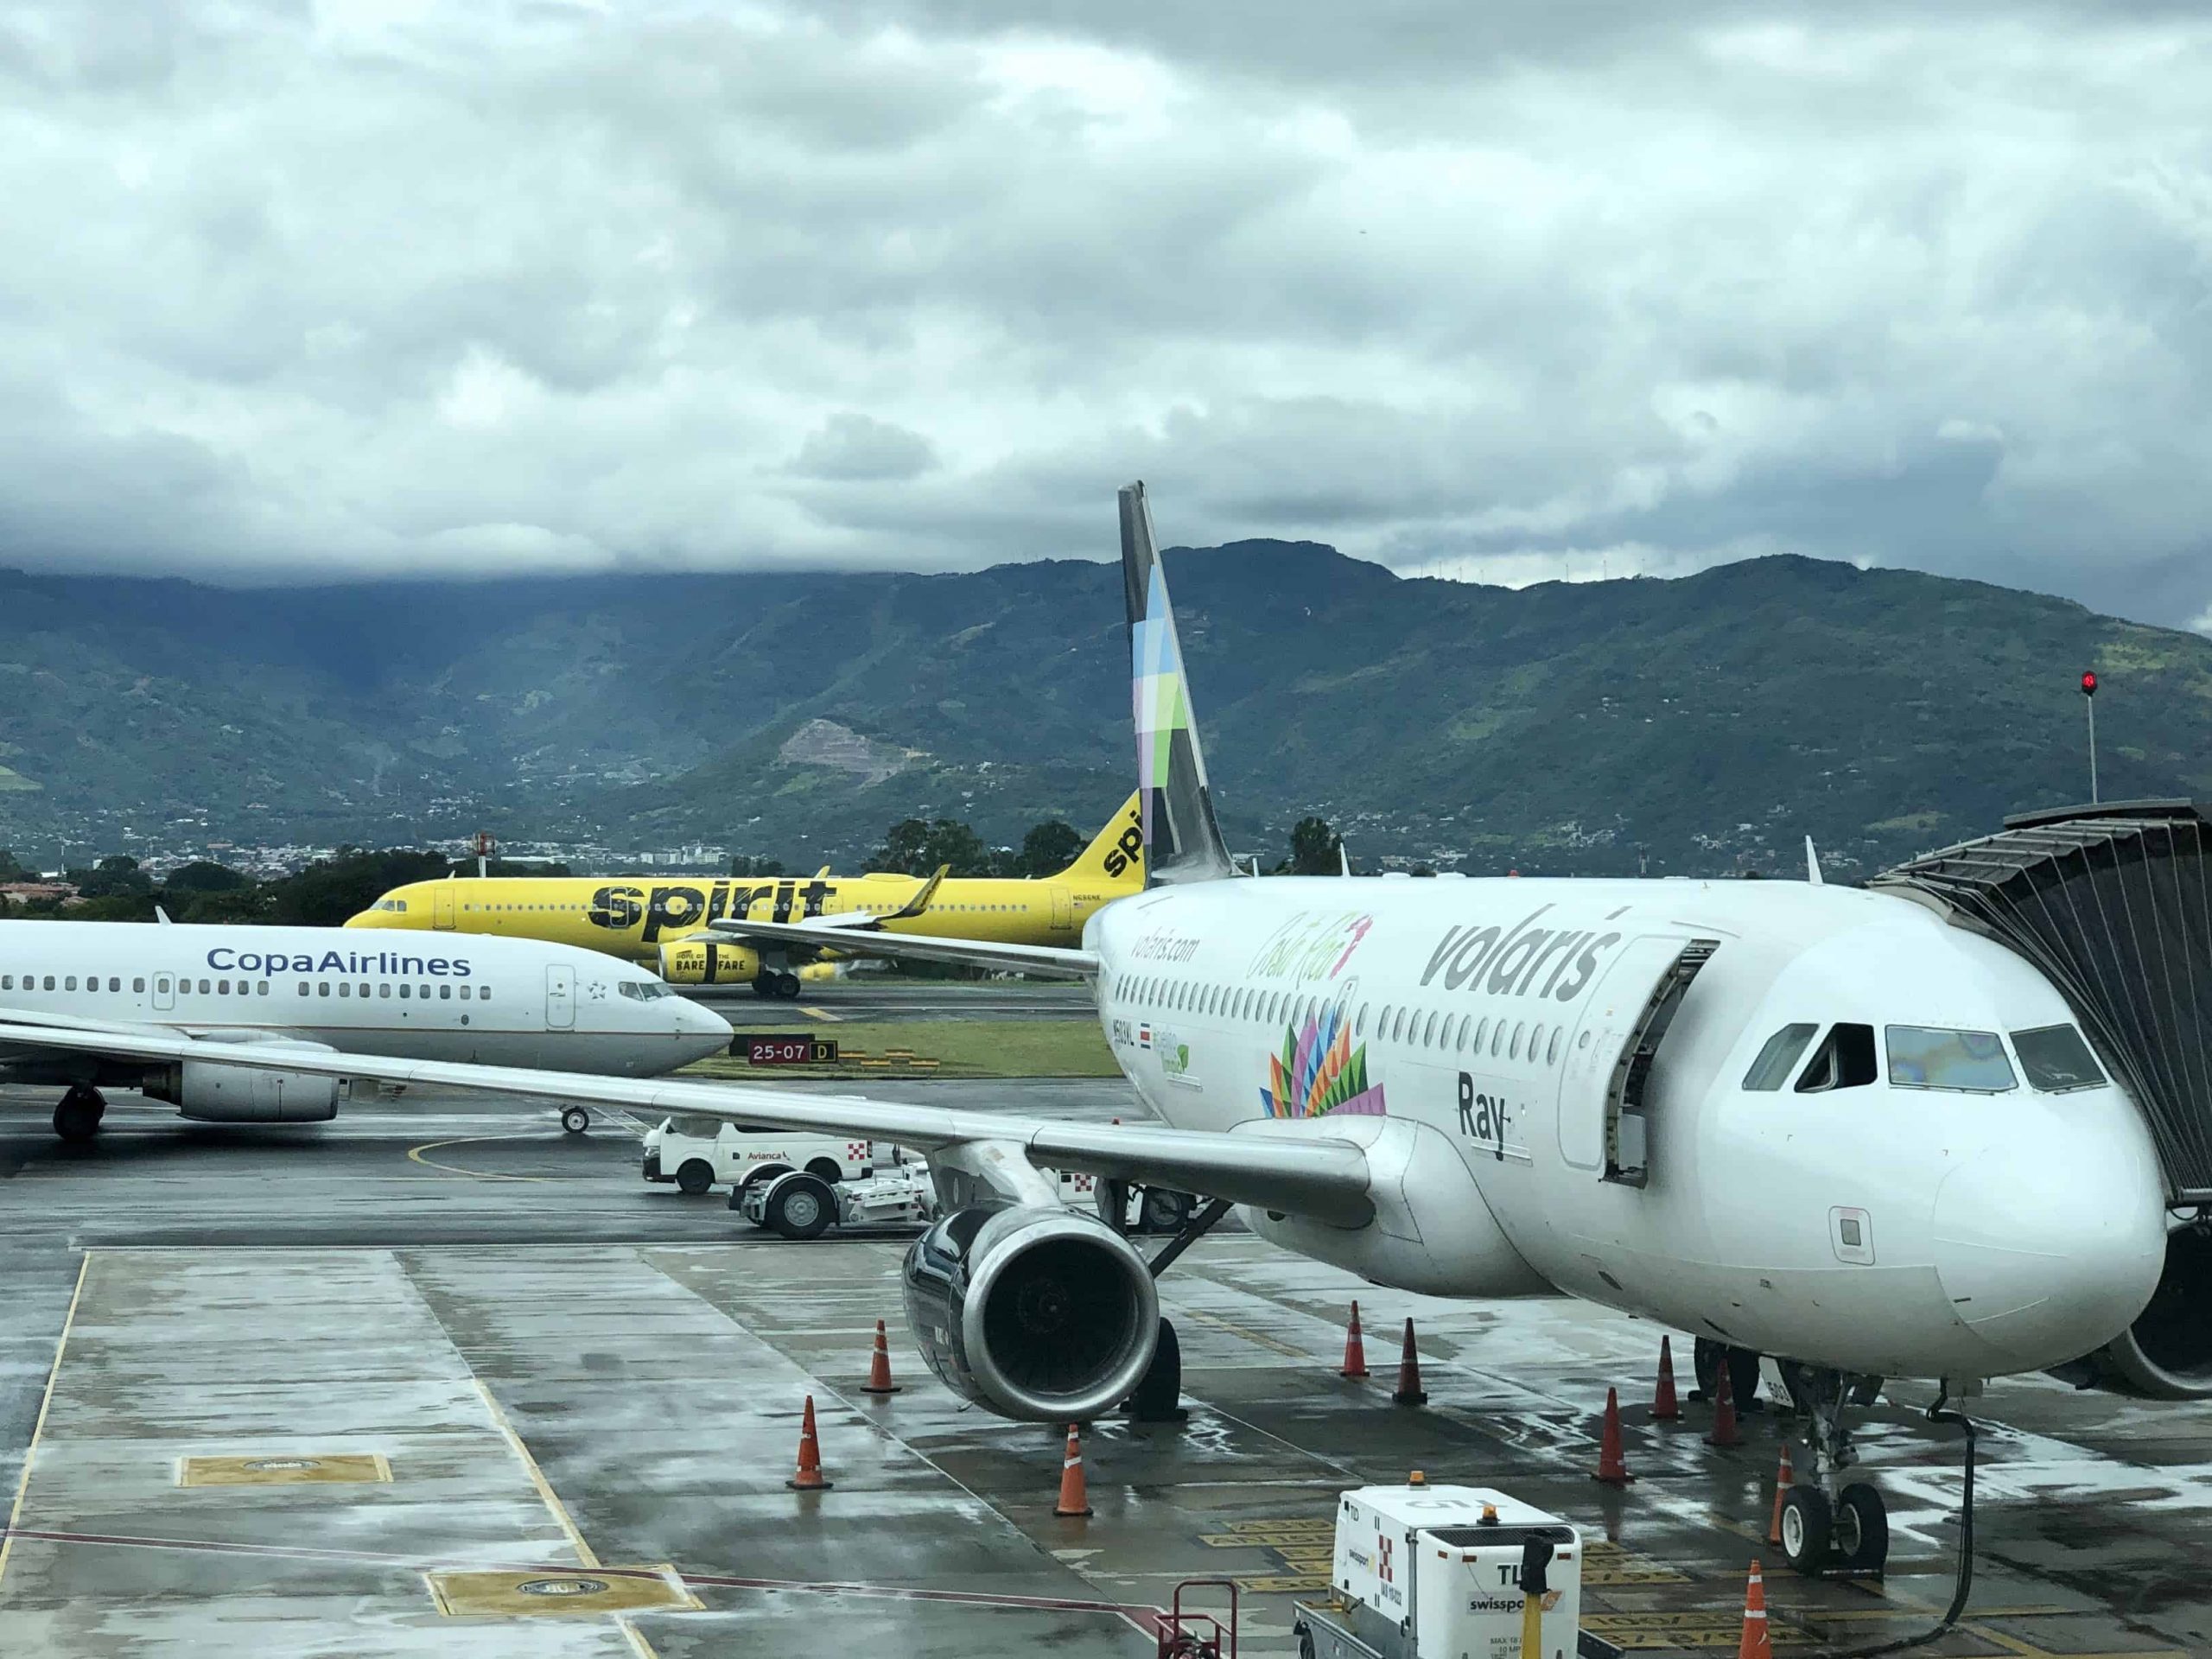 Airlines returning to Costa Rica